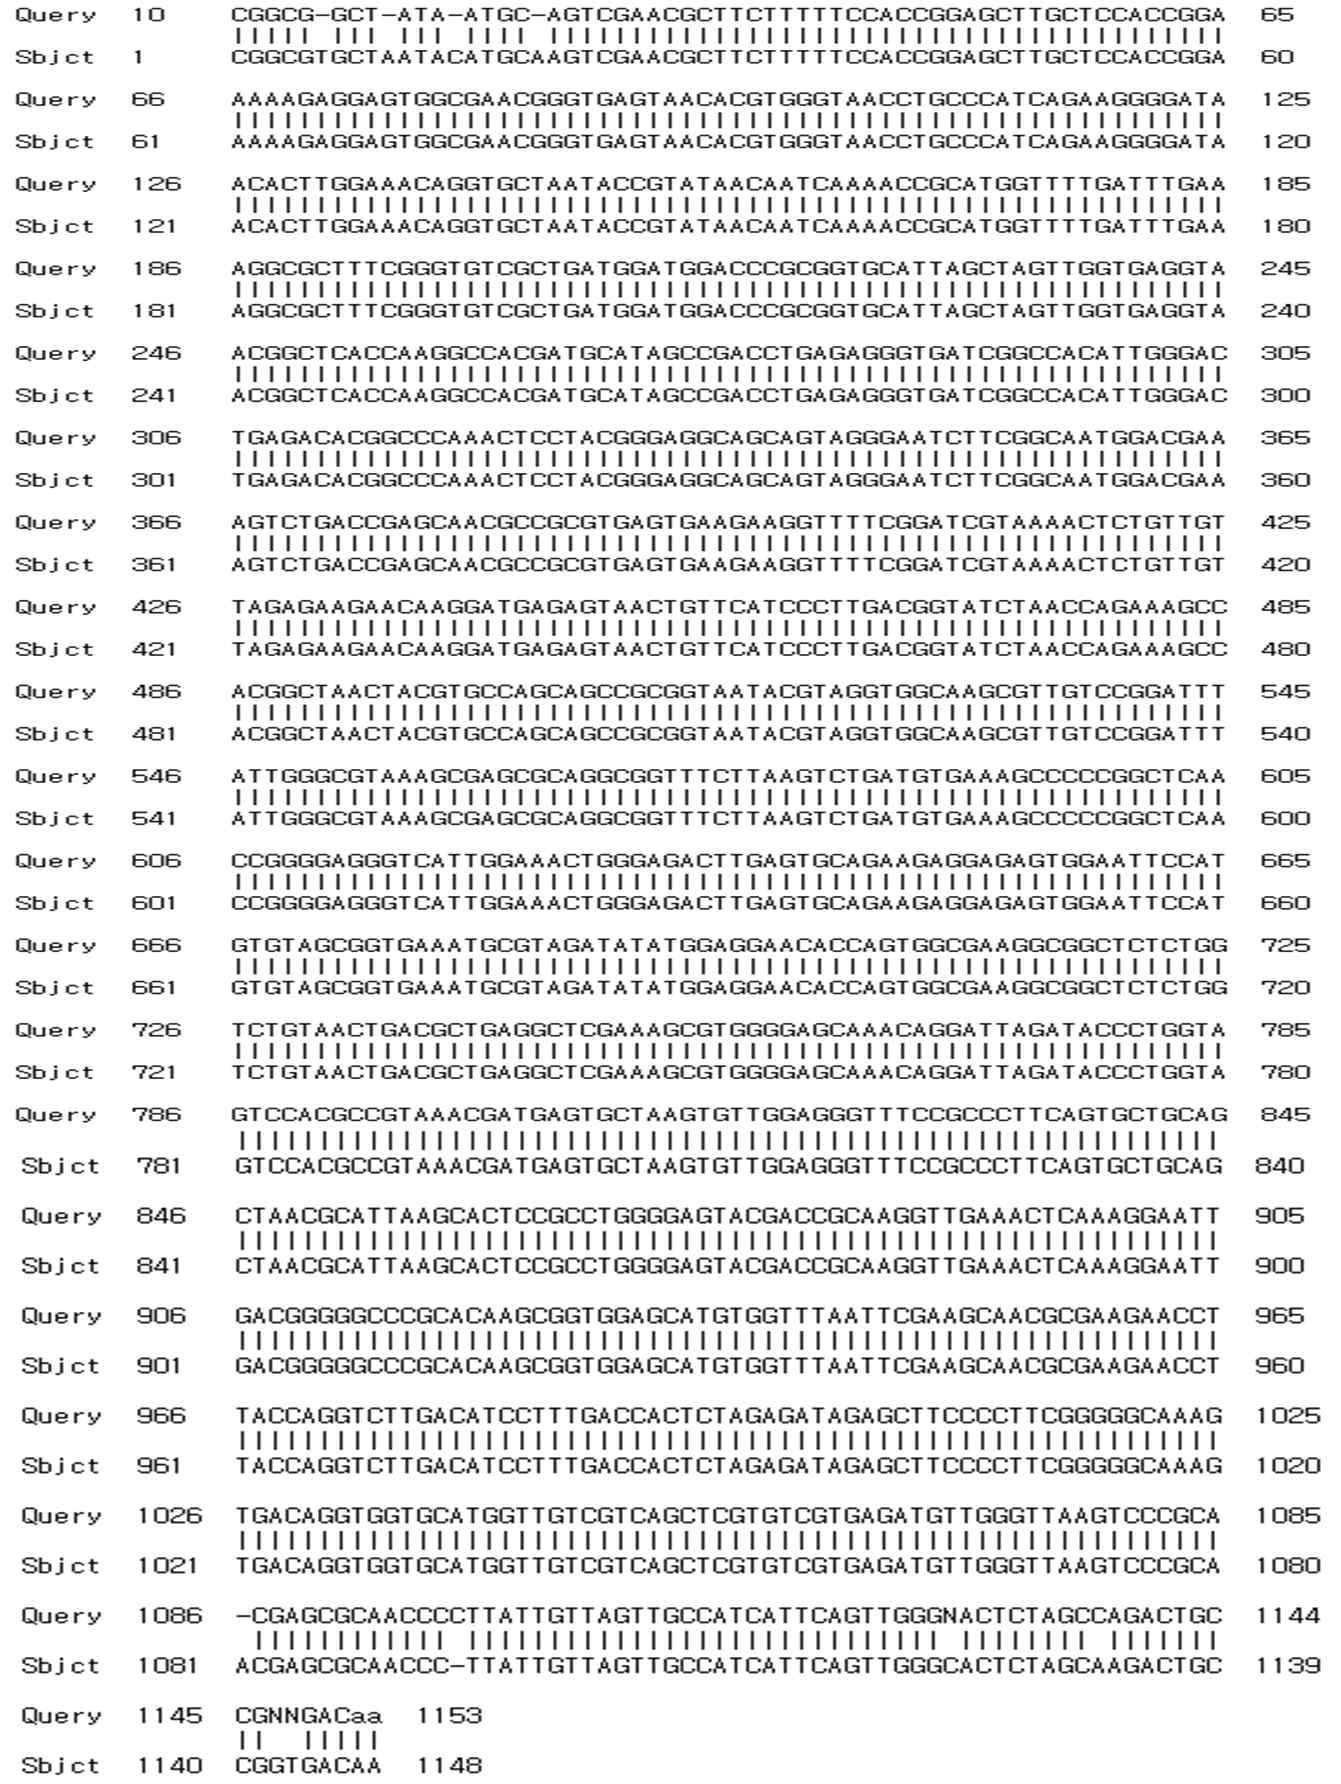 16S rRNA sequencing of C-178 strain